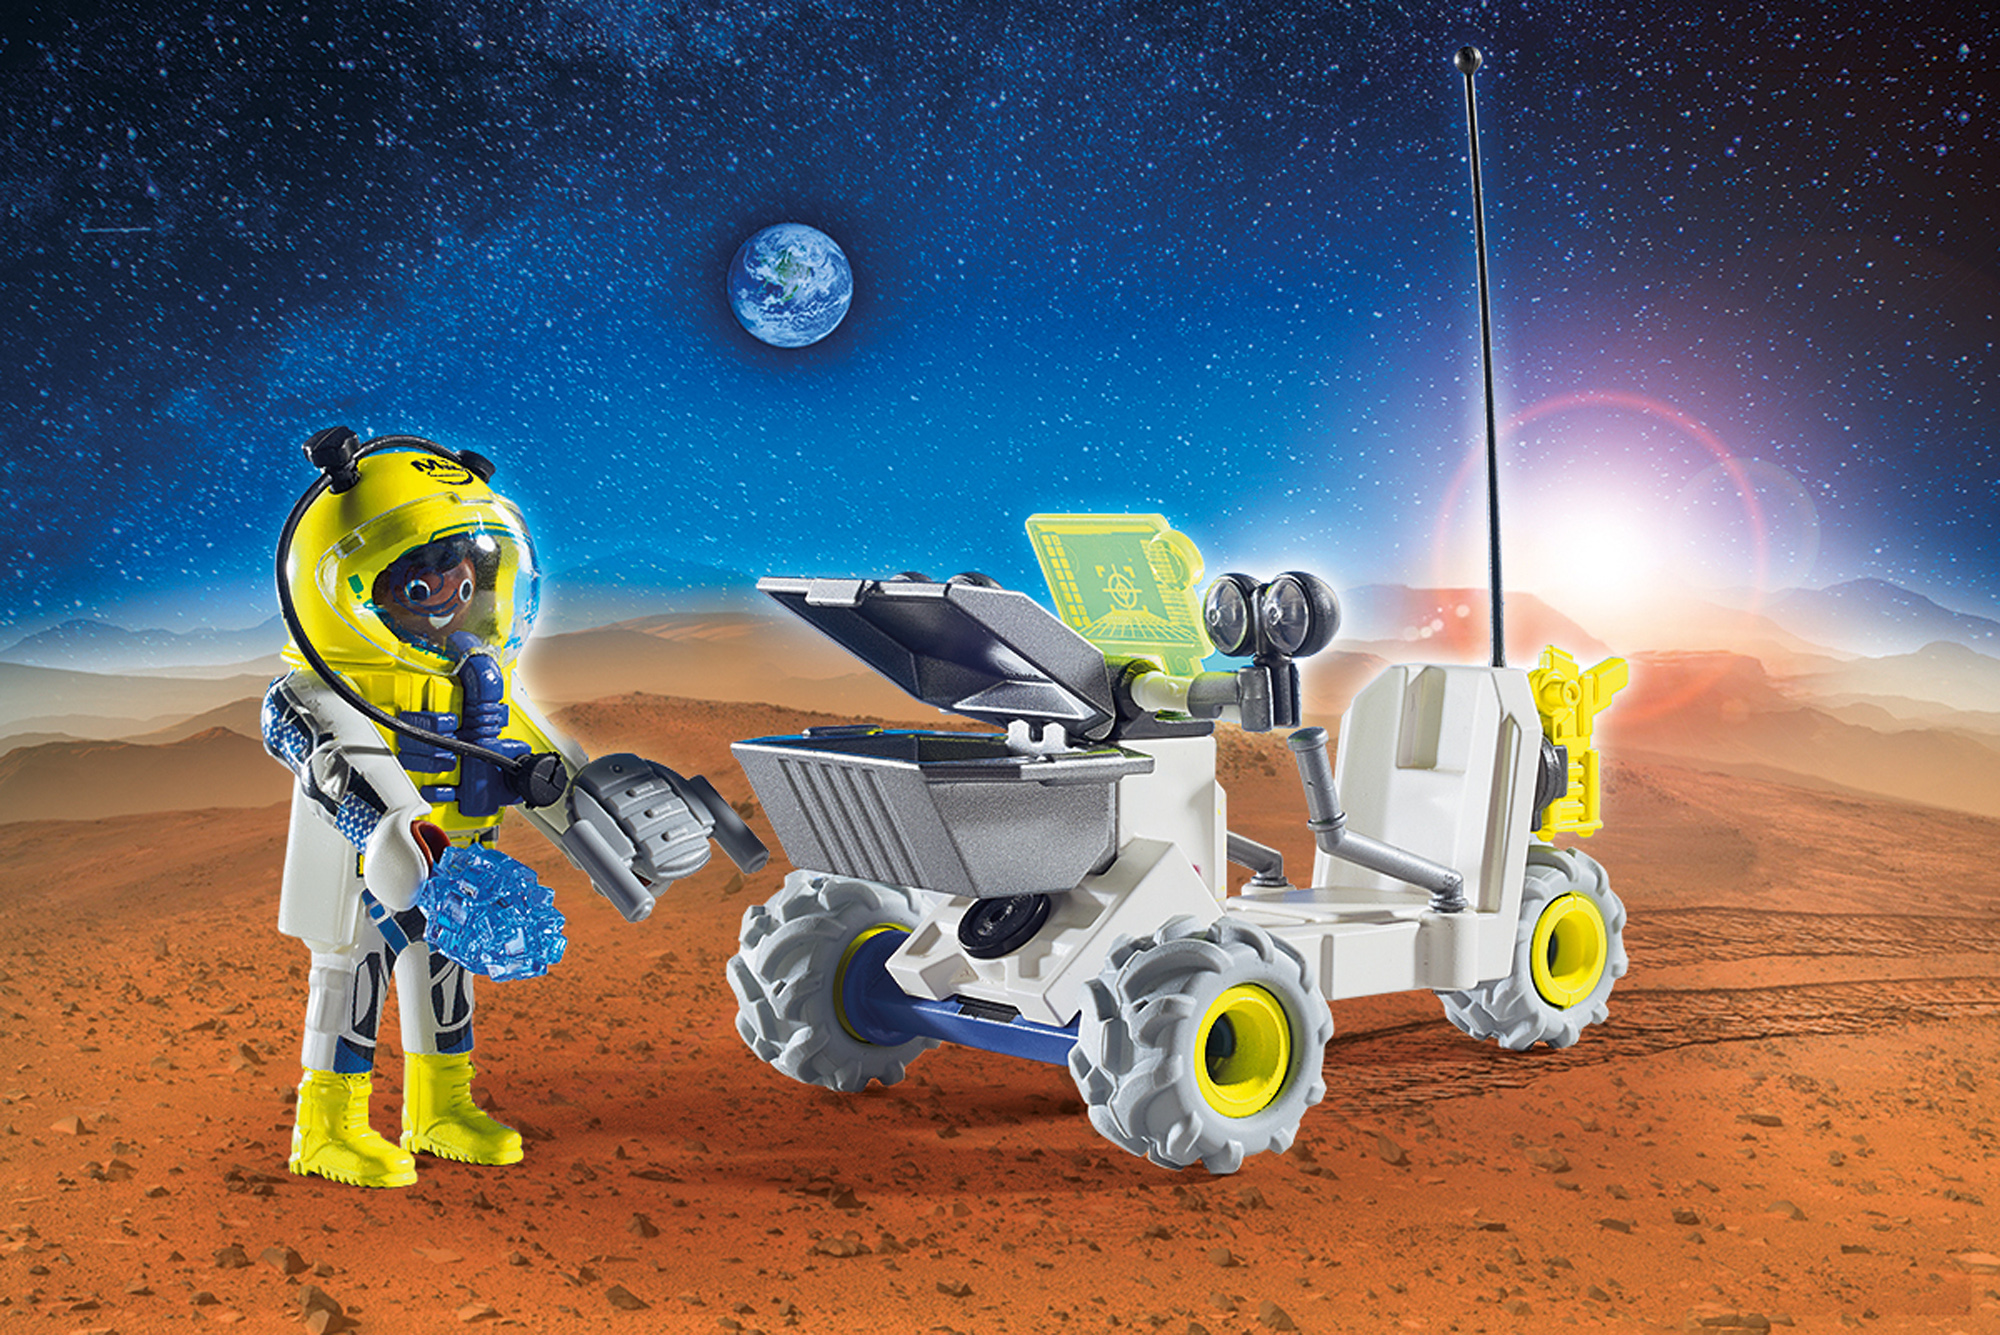 PLAYMOBIL Mars Rover Vehicle - image 3 of 6